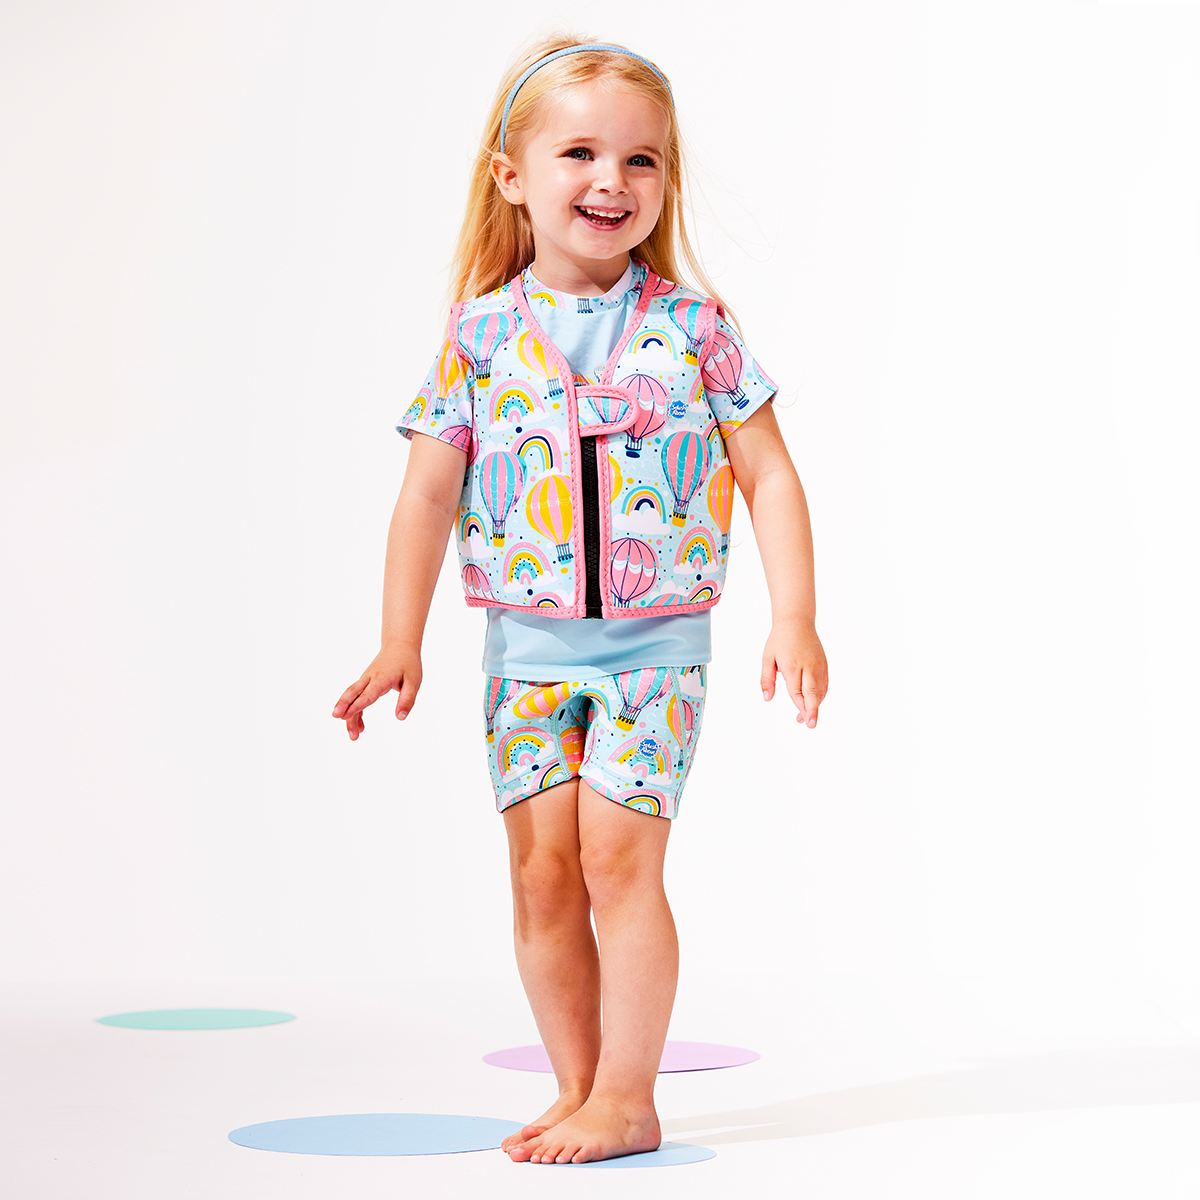 Lifestyle image of child wearing neoprene swim vest for toddlers with non-removable floats in baby blue, pink trims and hot air balloons themed print, including clouds and rainbows. She's also wearing matching jammers and rash top.